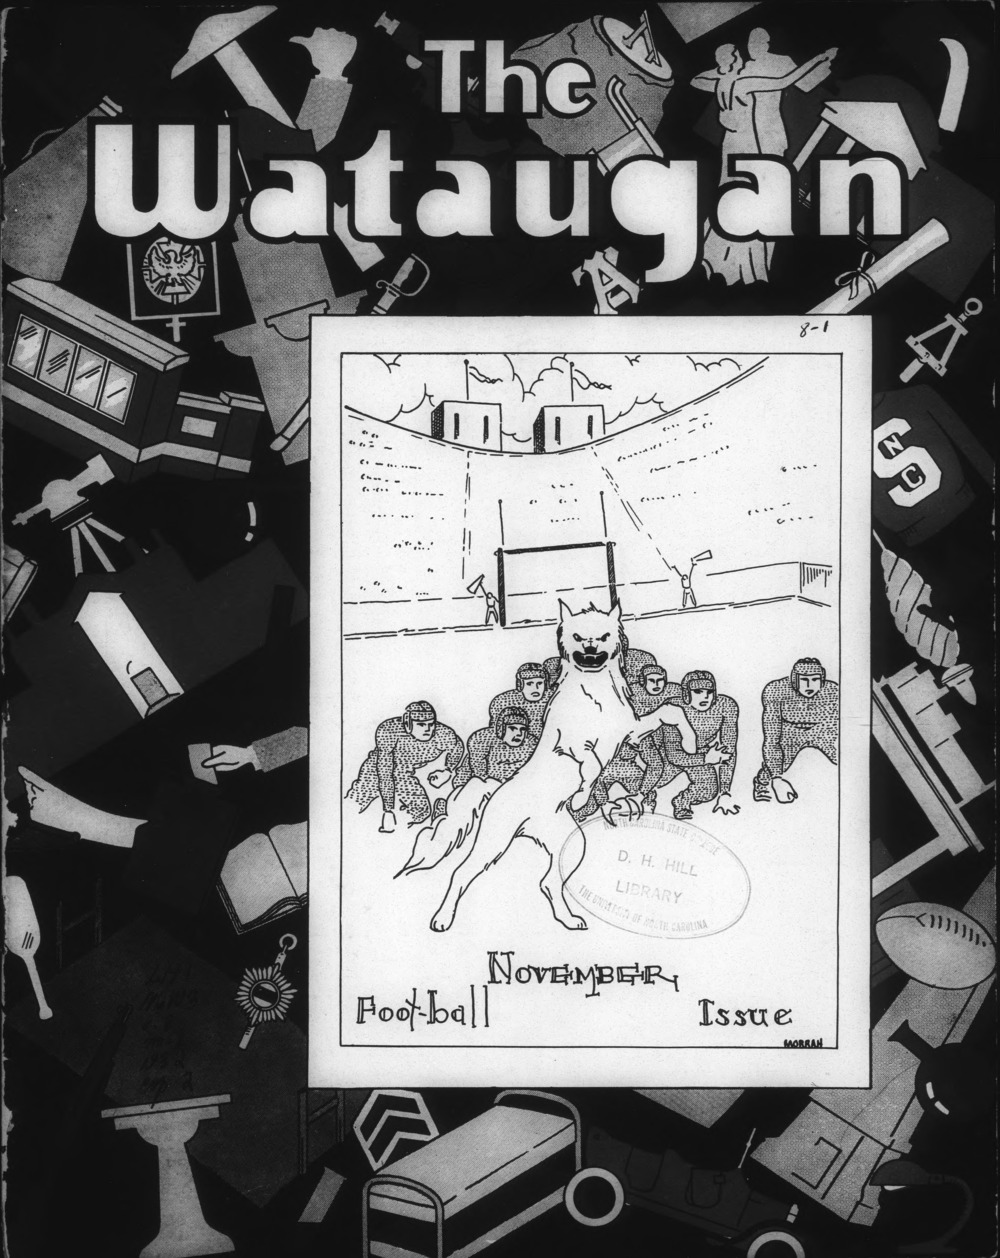  The Wataugan also featured wolf graphics, such as within this 1932 edition.